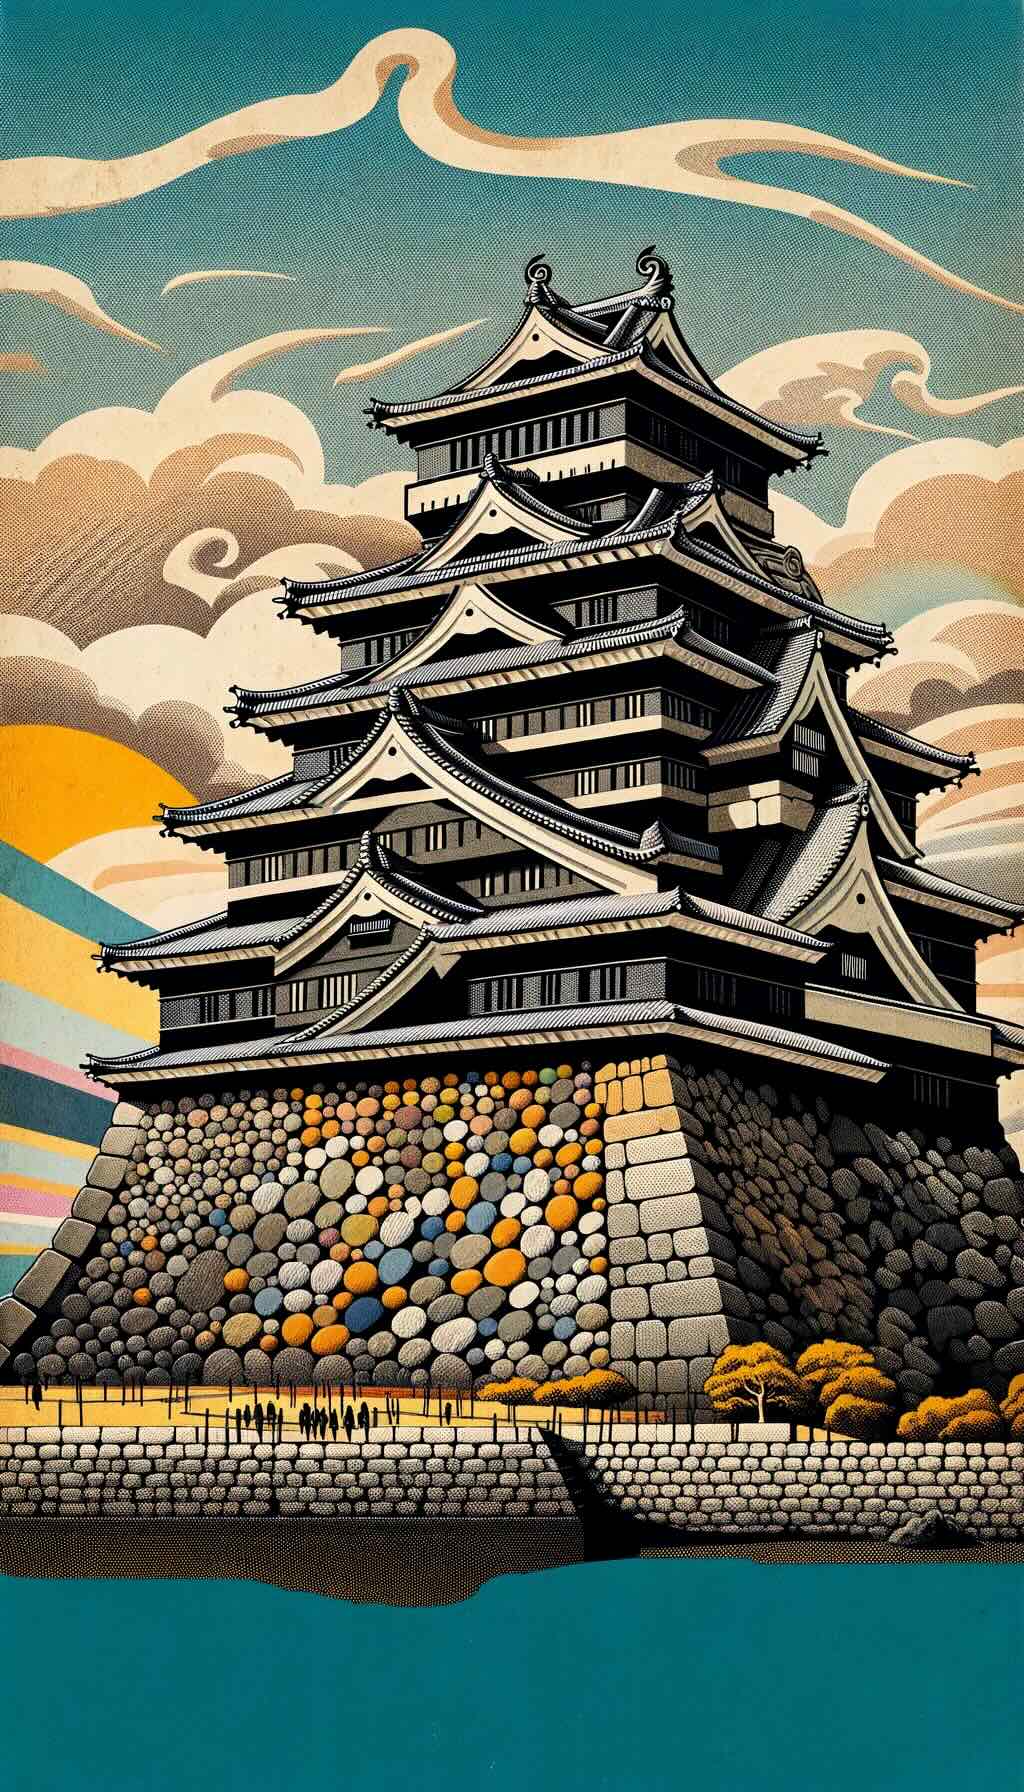 Kumamoto Castle captures the castle's formidable stone walls and its spirit of resilience and restoration following the 2016 earthquake